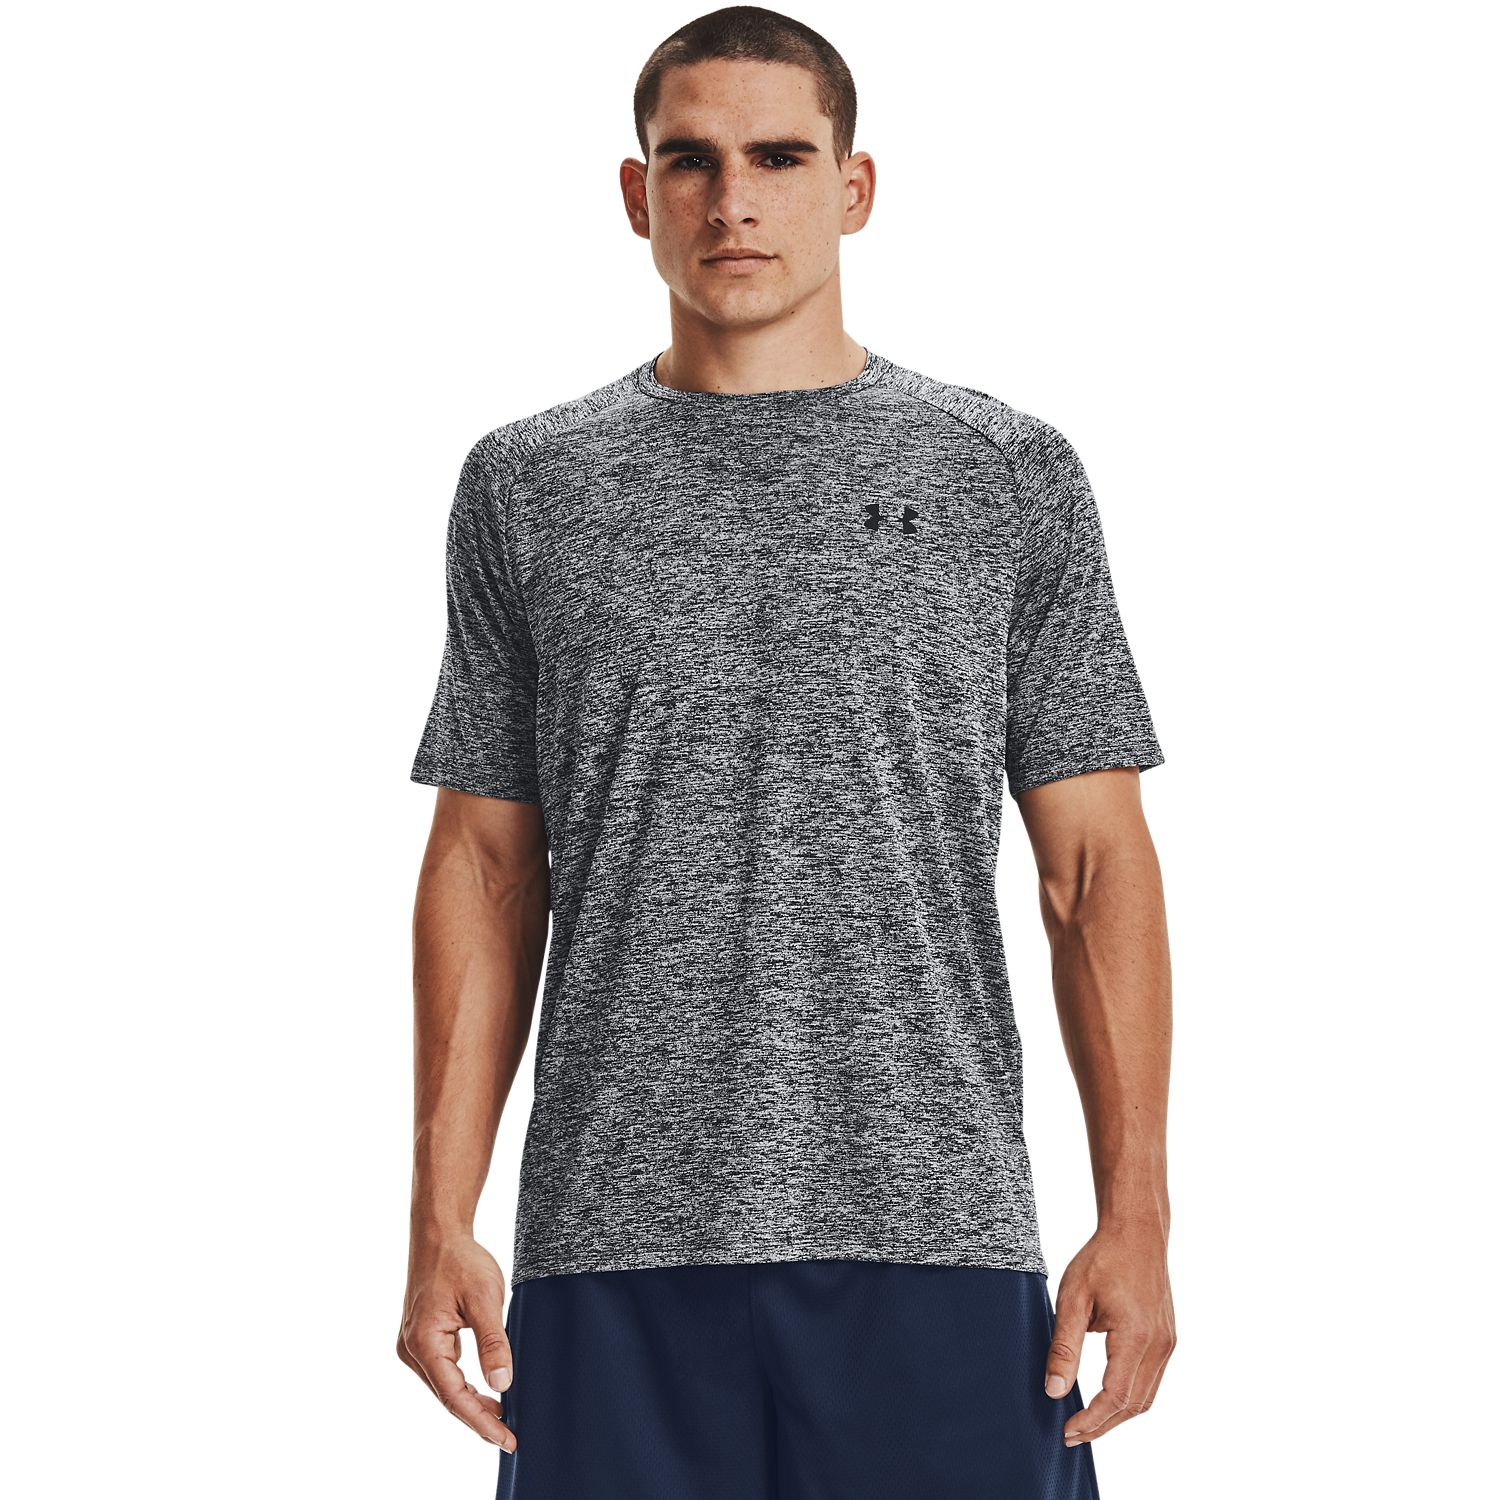 Men's Under Armour T-Shirts: Top Off 